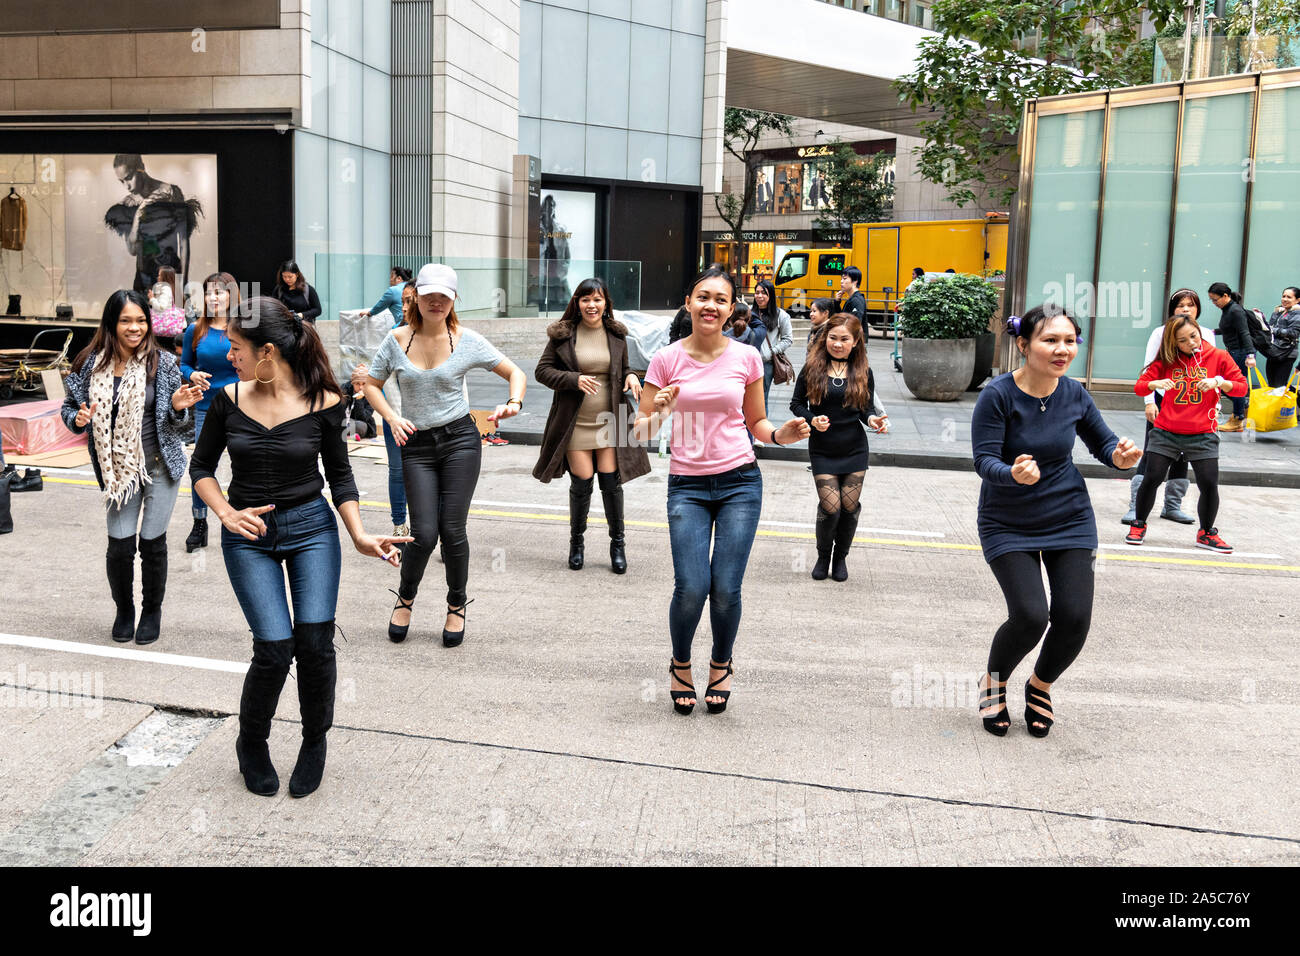 Filipino domestic workers gather on their day-off and hold an impromptu line dance in Central District, Hong Kong. Approximately 130,000 Filipino domestic servants work in Hong Kong and all have Sundays off. Stock Photo